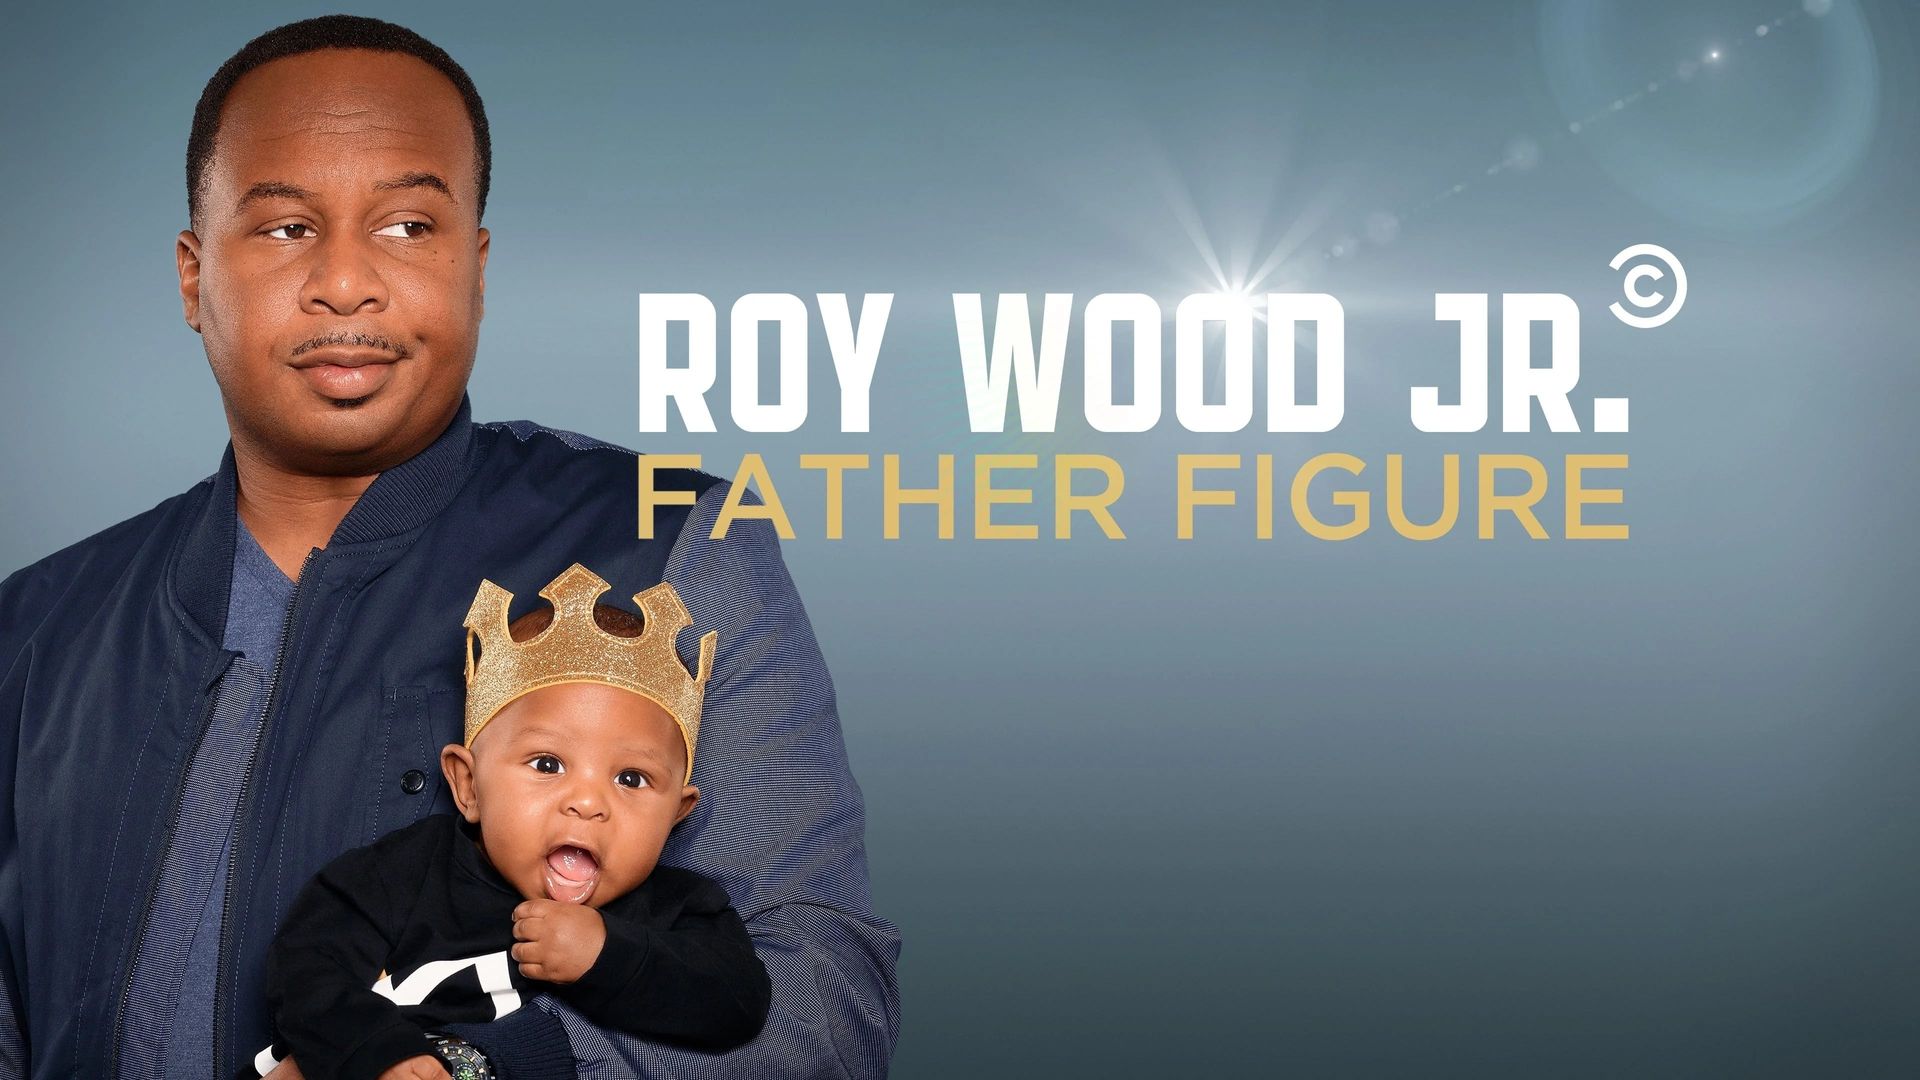 Roy Wood Jr.: Father Figure background